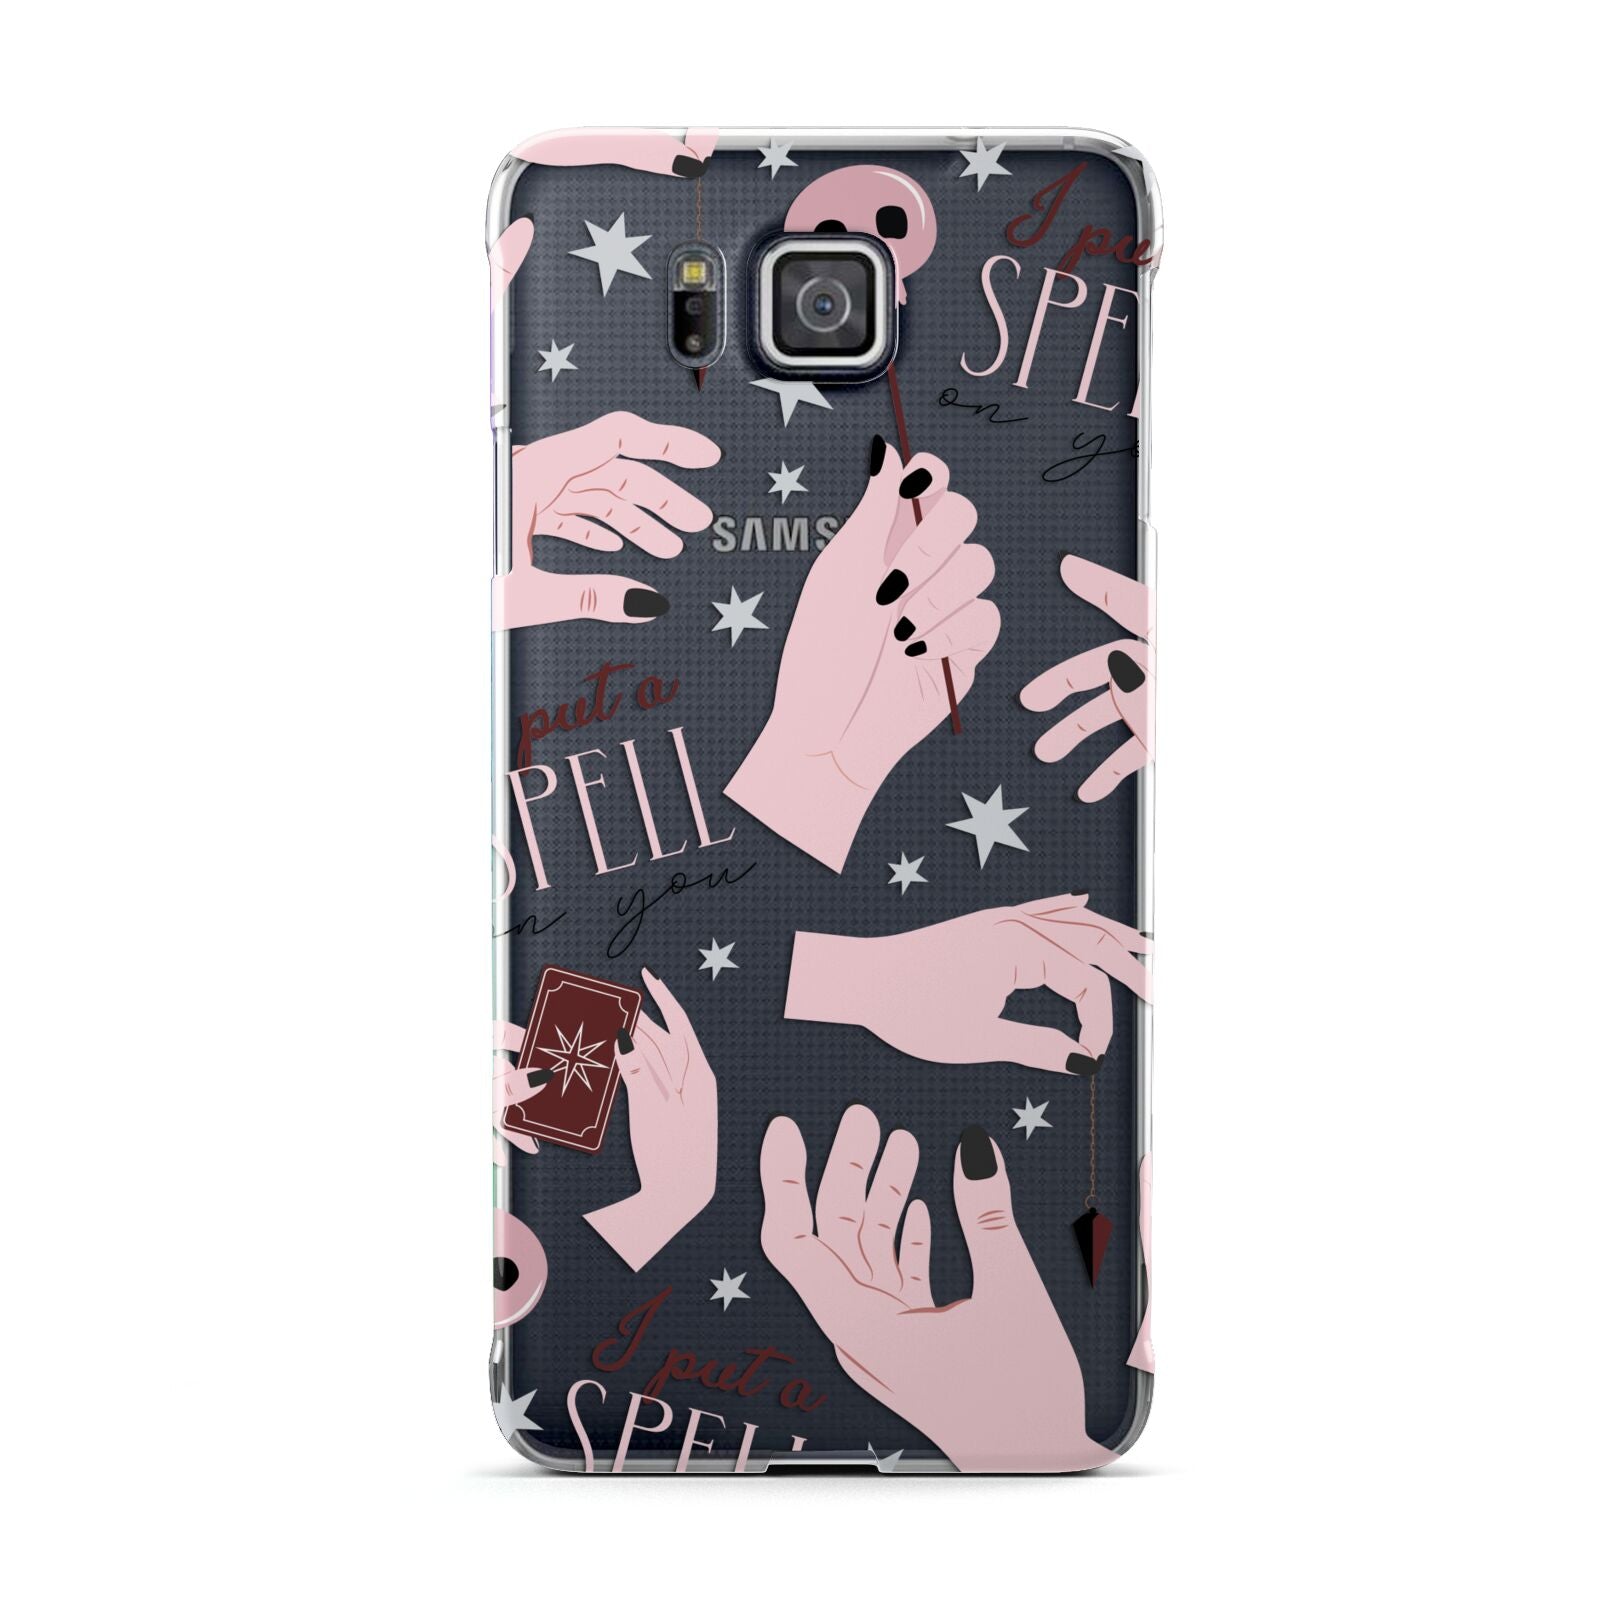 Witches Hands and Tarot Cards Samsung Galaxy Alpha Case